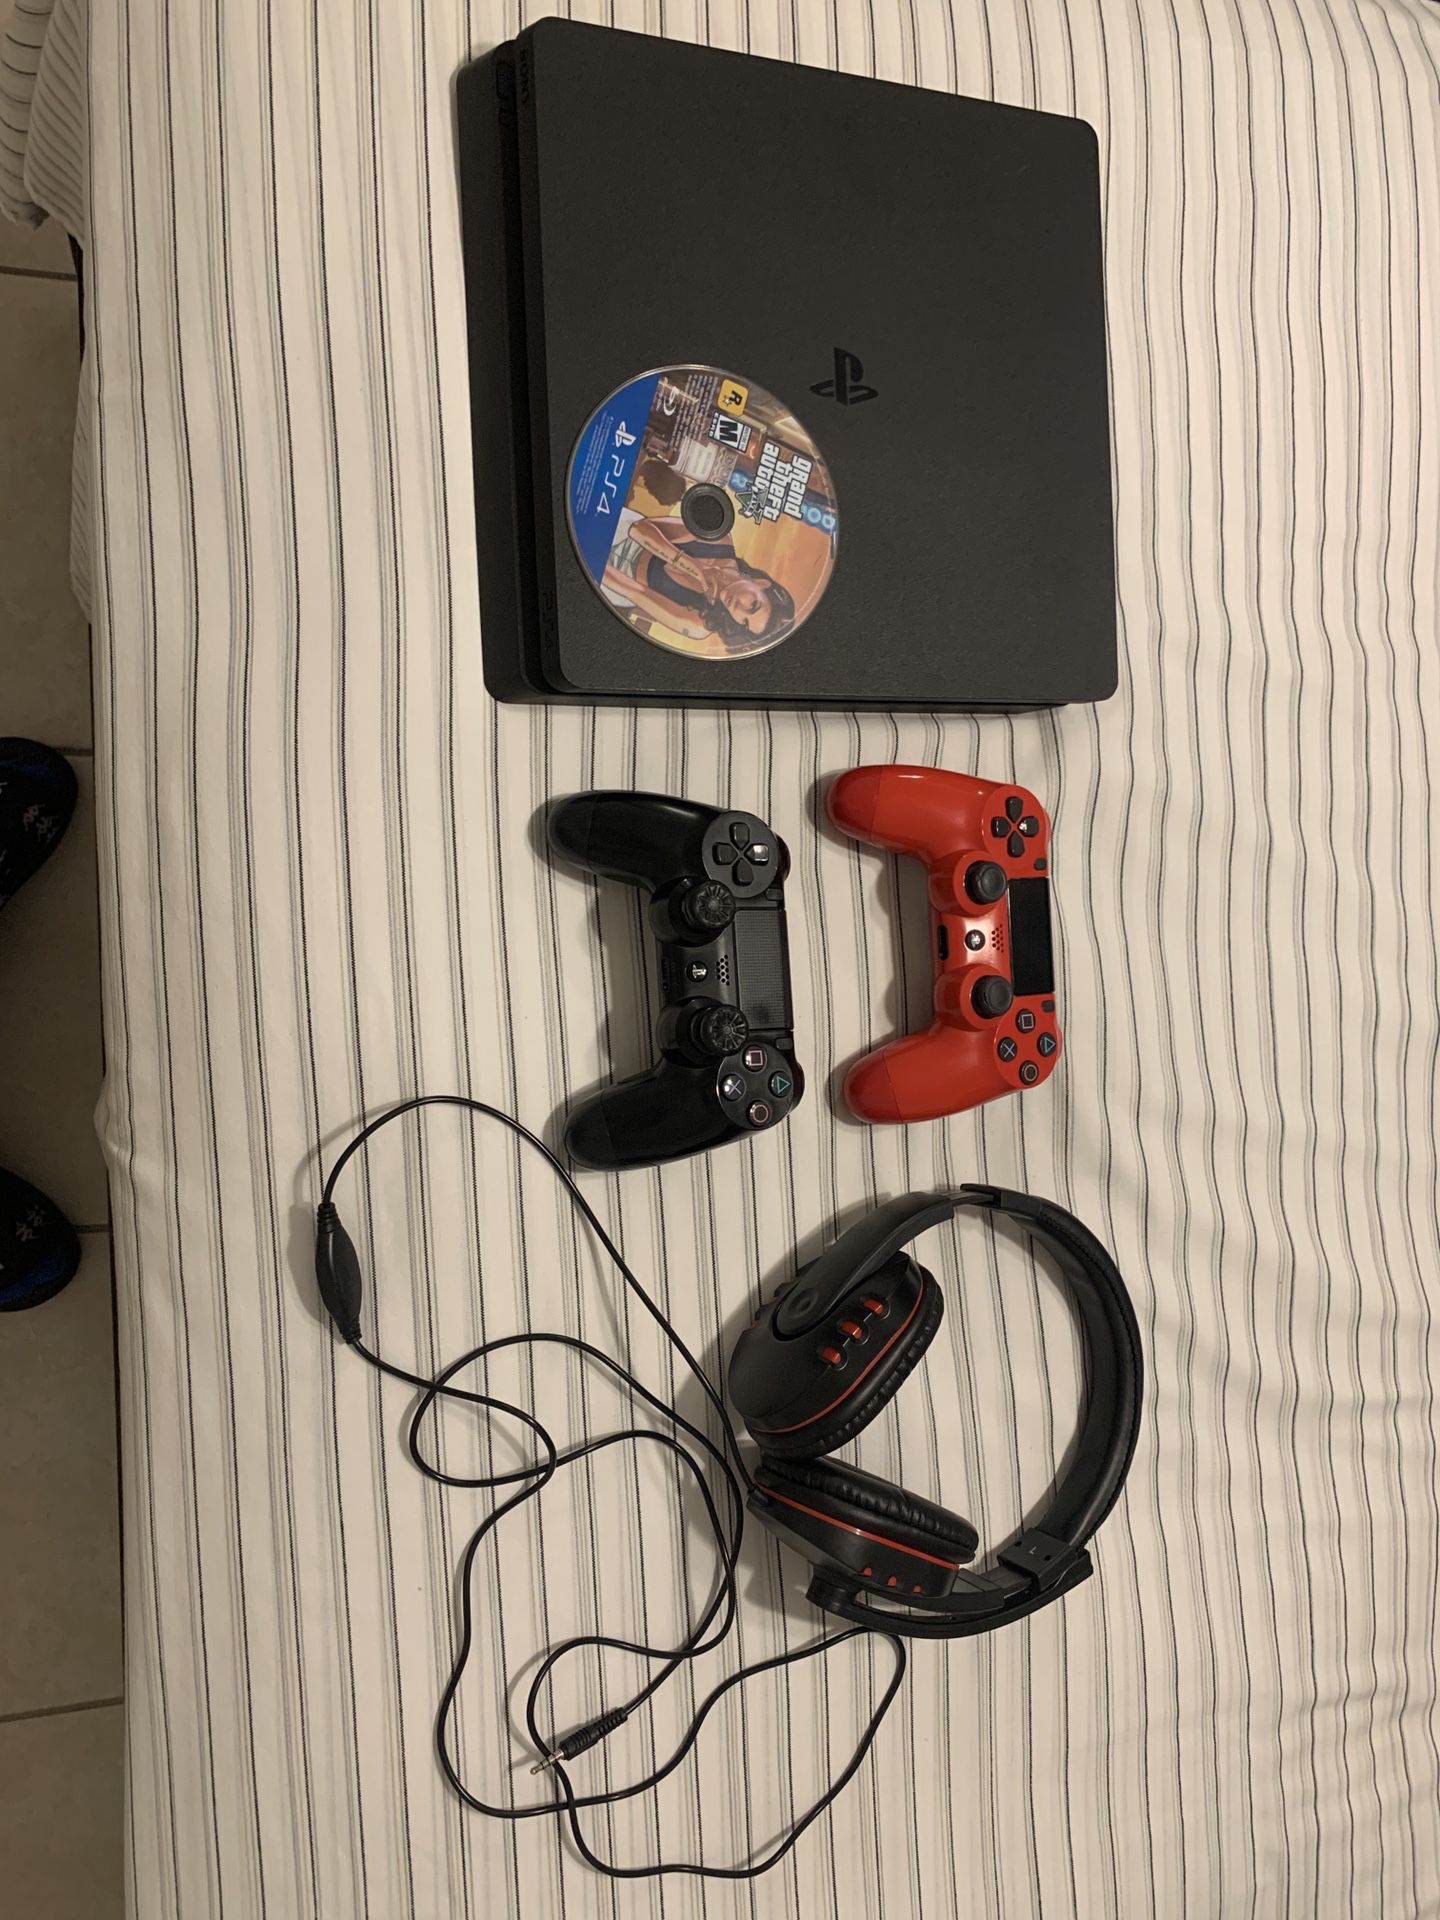 Black Ps4 with 2 controllers, headset, and gta